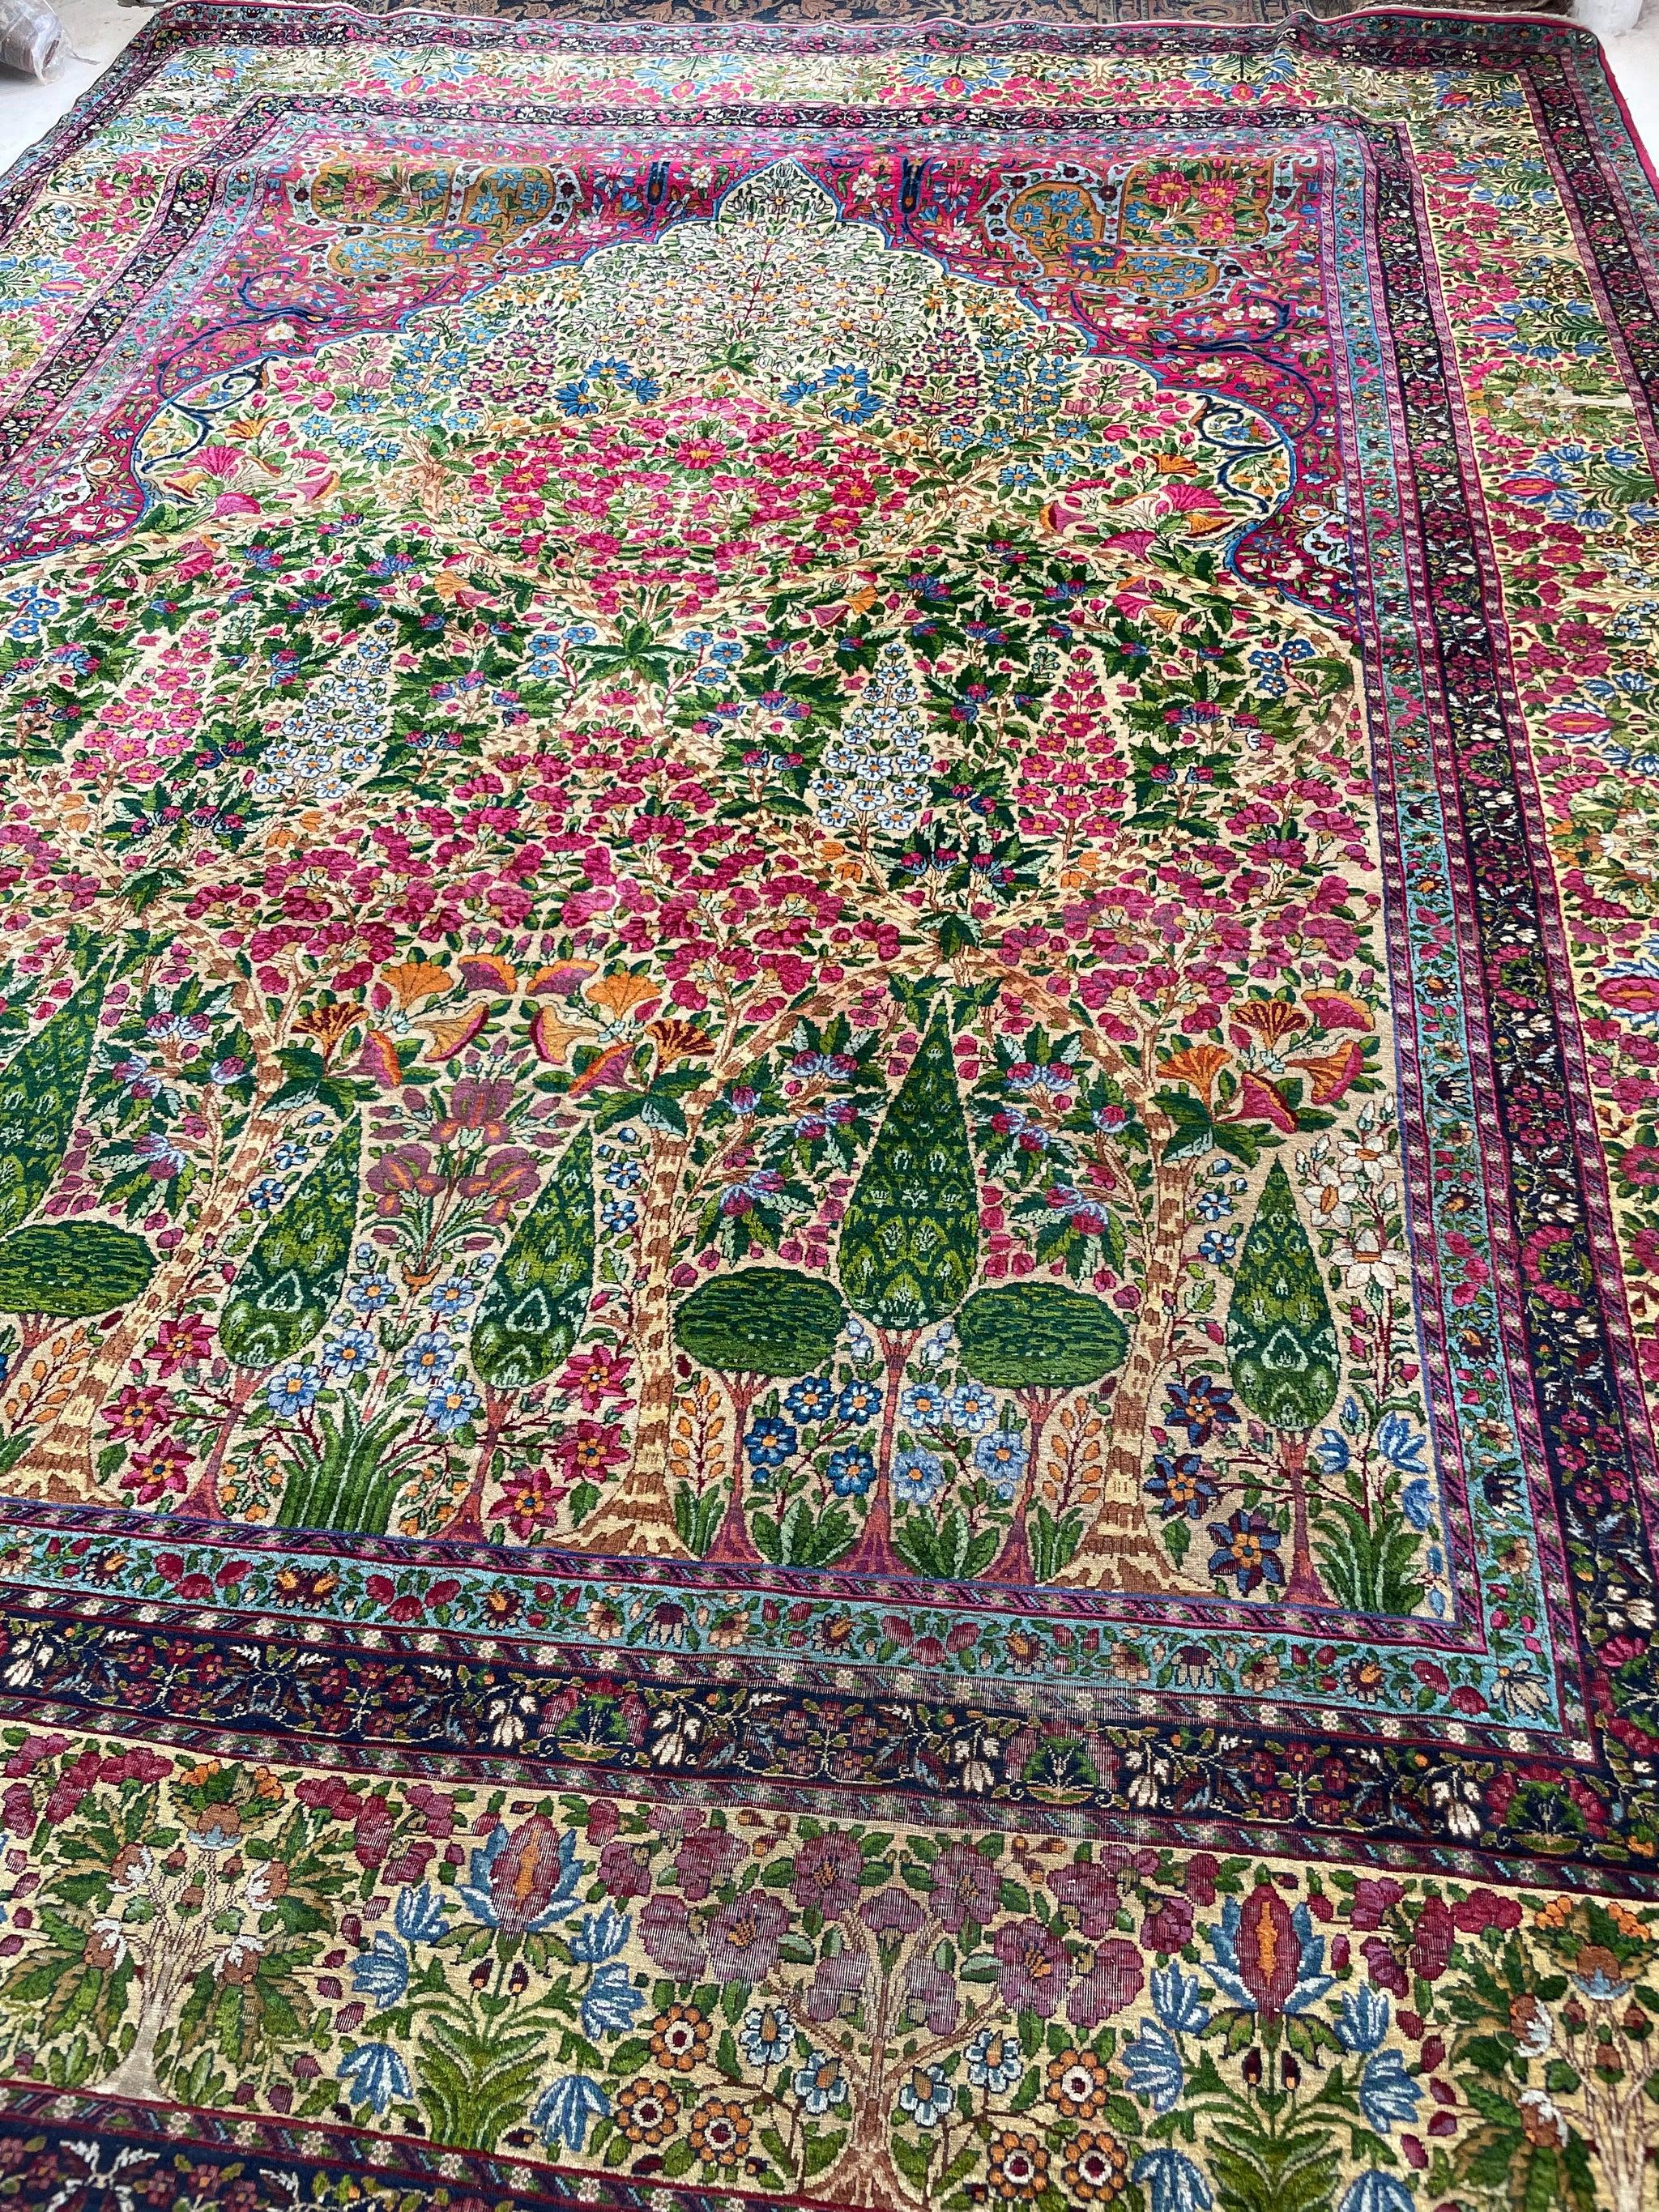 Spectacle Antique Kerman Lavar  Millefleur & Cypress Tree of Life  Spectrum Color Palette

About: ONE OF THE MOST BEAUTIFUL...

Size:  11.4 x 14.5
Age: Antique, C. 1930-40's
Pile: Incredible strong and soft wool pile throughout, subtle age-related